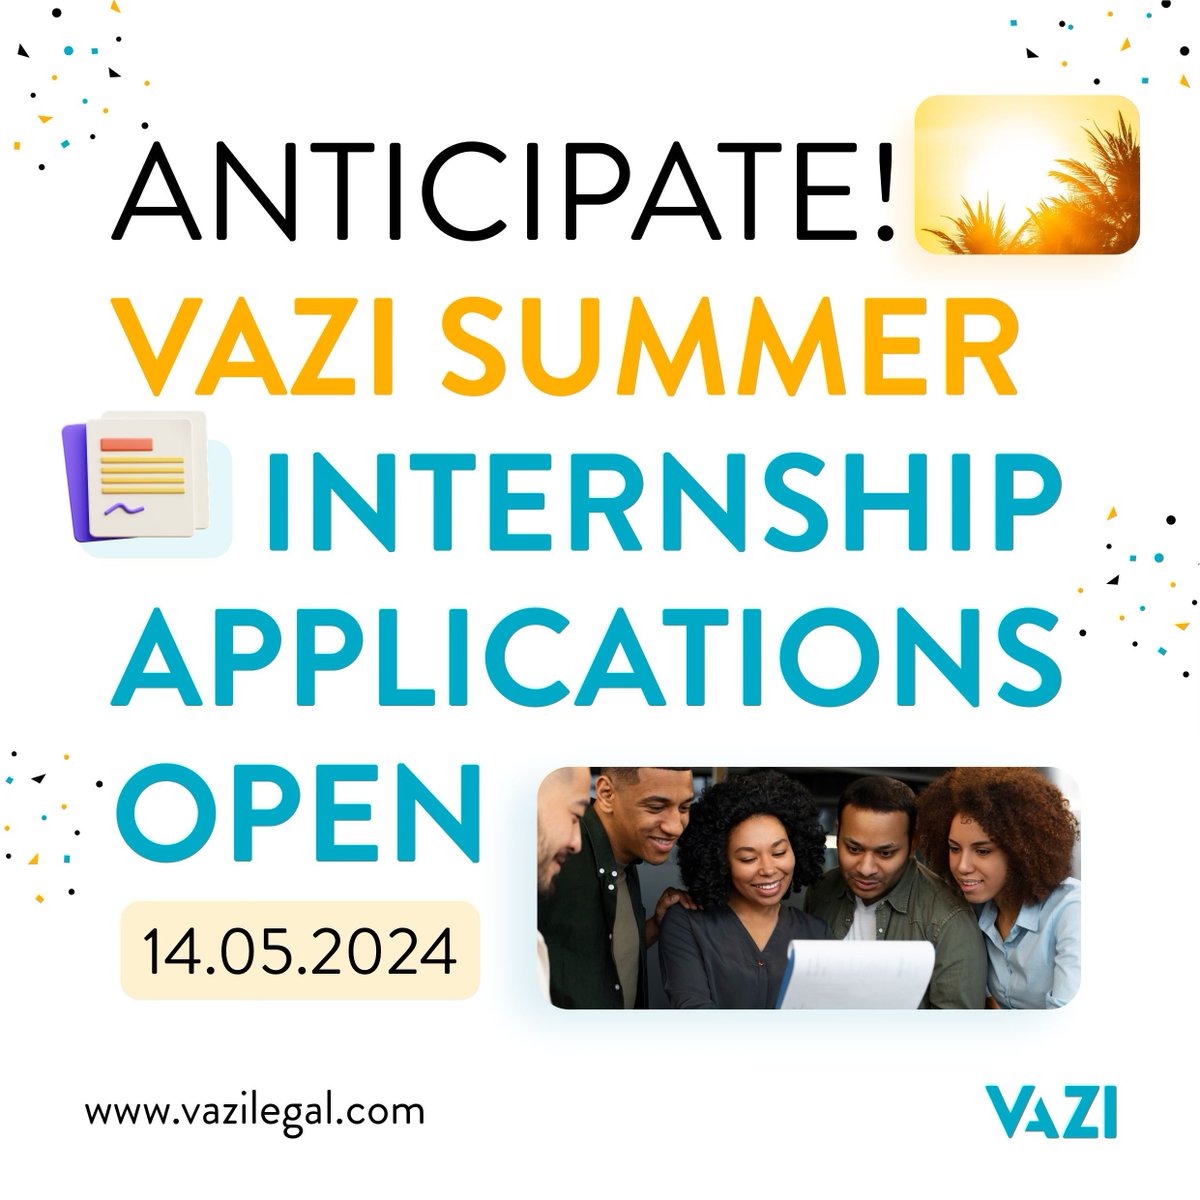 🌞 Get ready for the internship of a lifetime! Applications for our summer internship at Vazi open in just 3 days. Don't miss out on this incredible opportunity to kickstart your career journey! Keep your eyes and ears open! #VaziInternship #TechLaw #SummerInternship